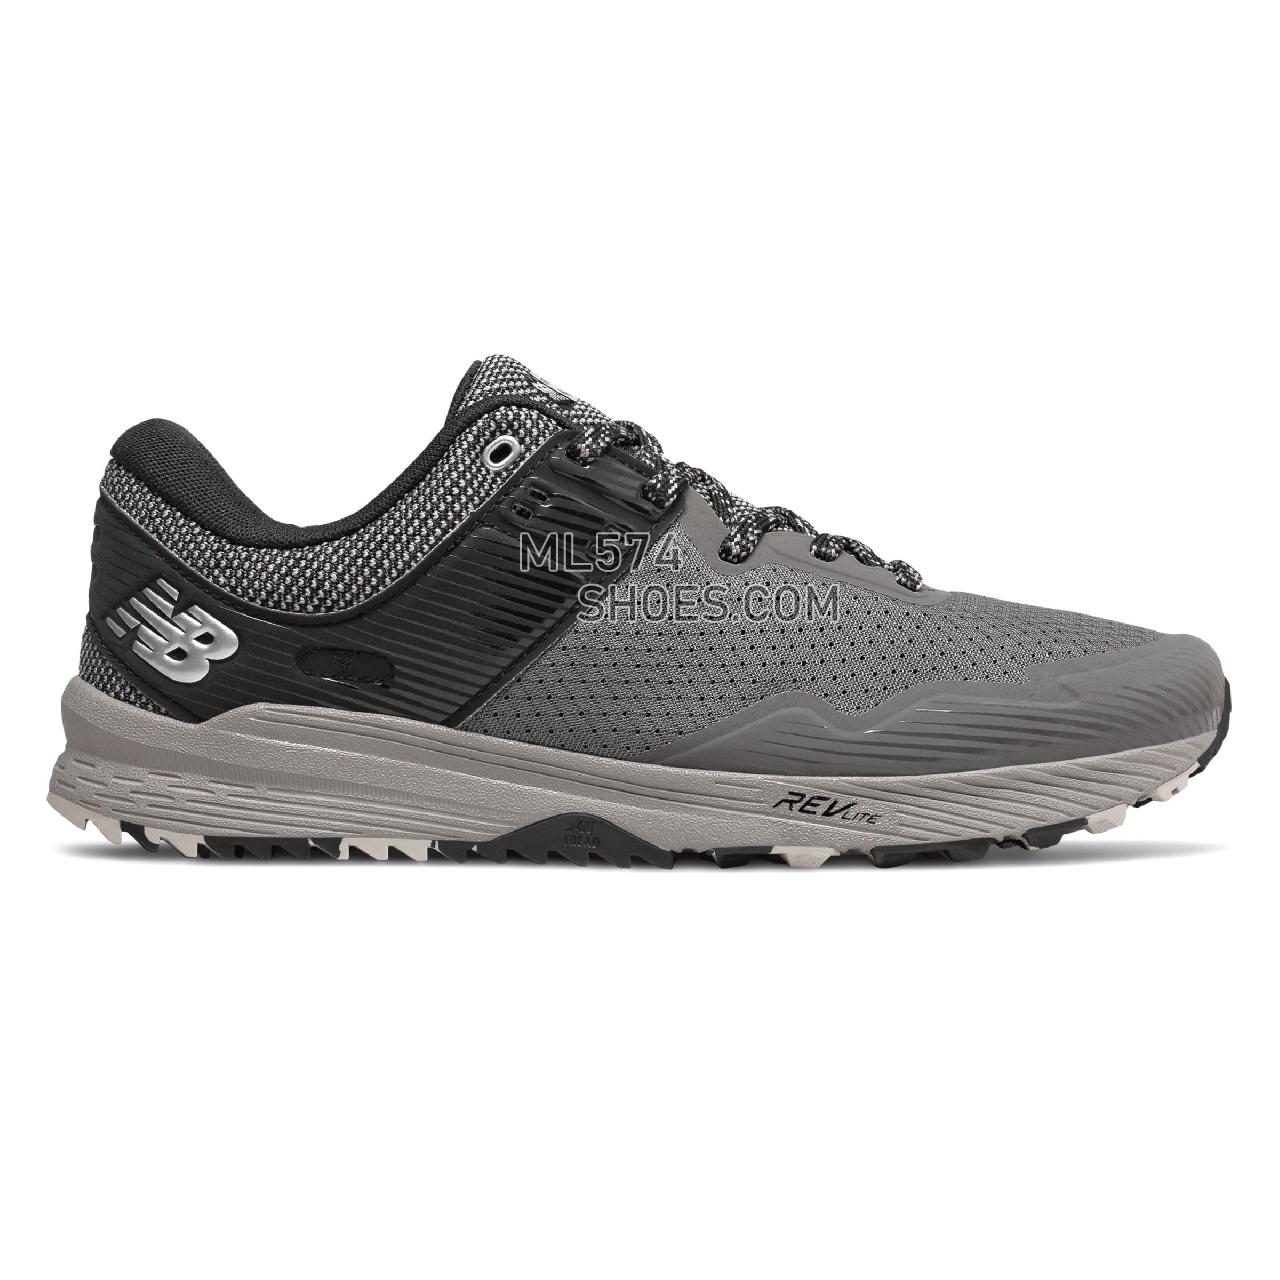 New Balance FuelCore NITRELv2 - Men's 2 - Running Castlerock with Black and Silver - MTNTRLC2